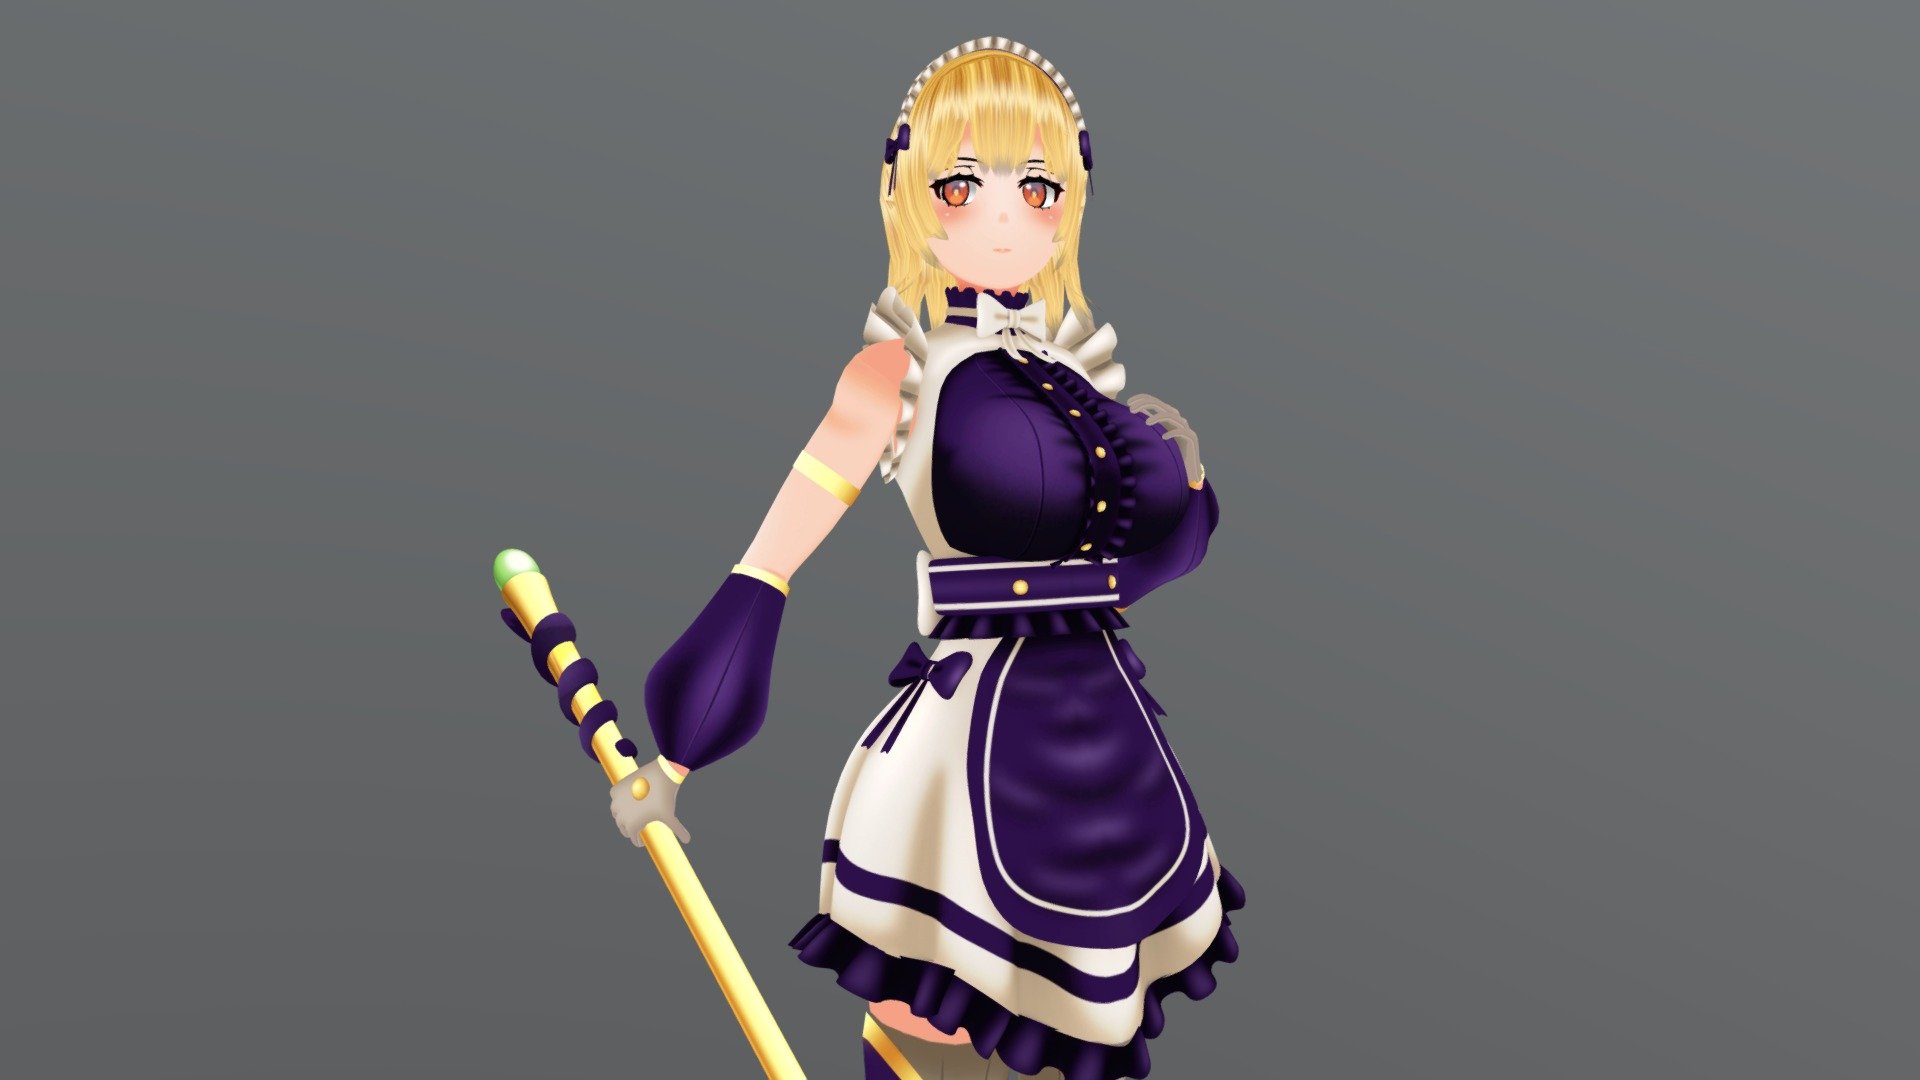 Meet Emma!

This is a character I invented based on a maid and a warrior. 

Enjoy! - EMMA - 3D model by Animageek (@Animgeek) 3d model